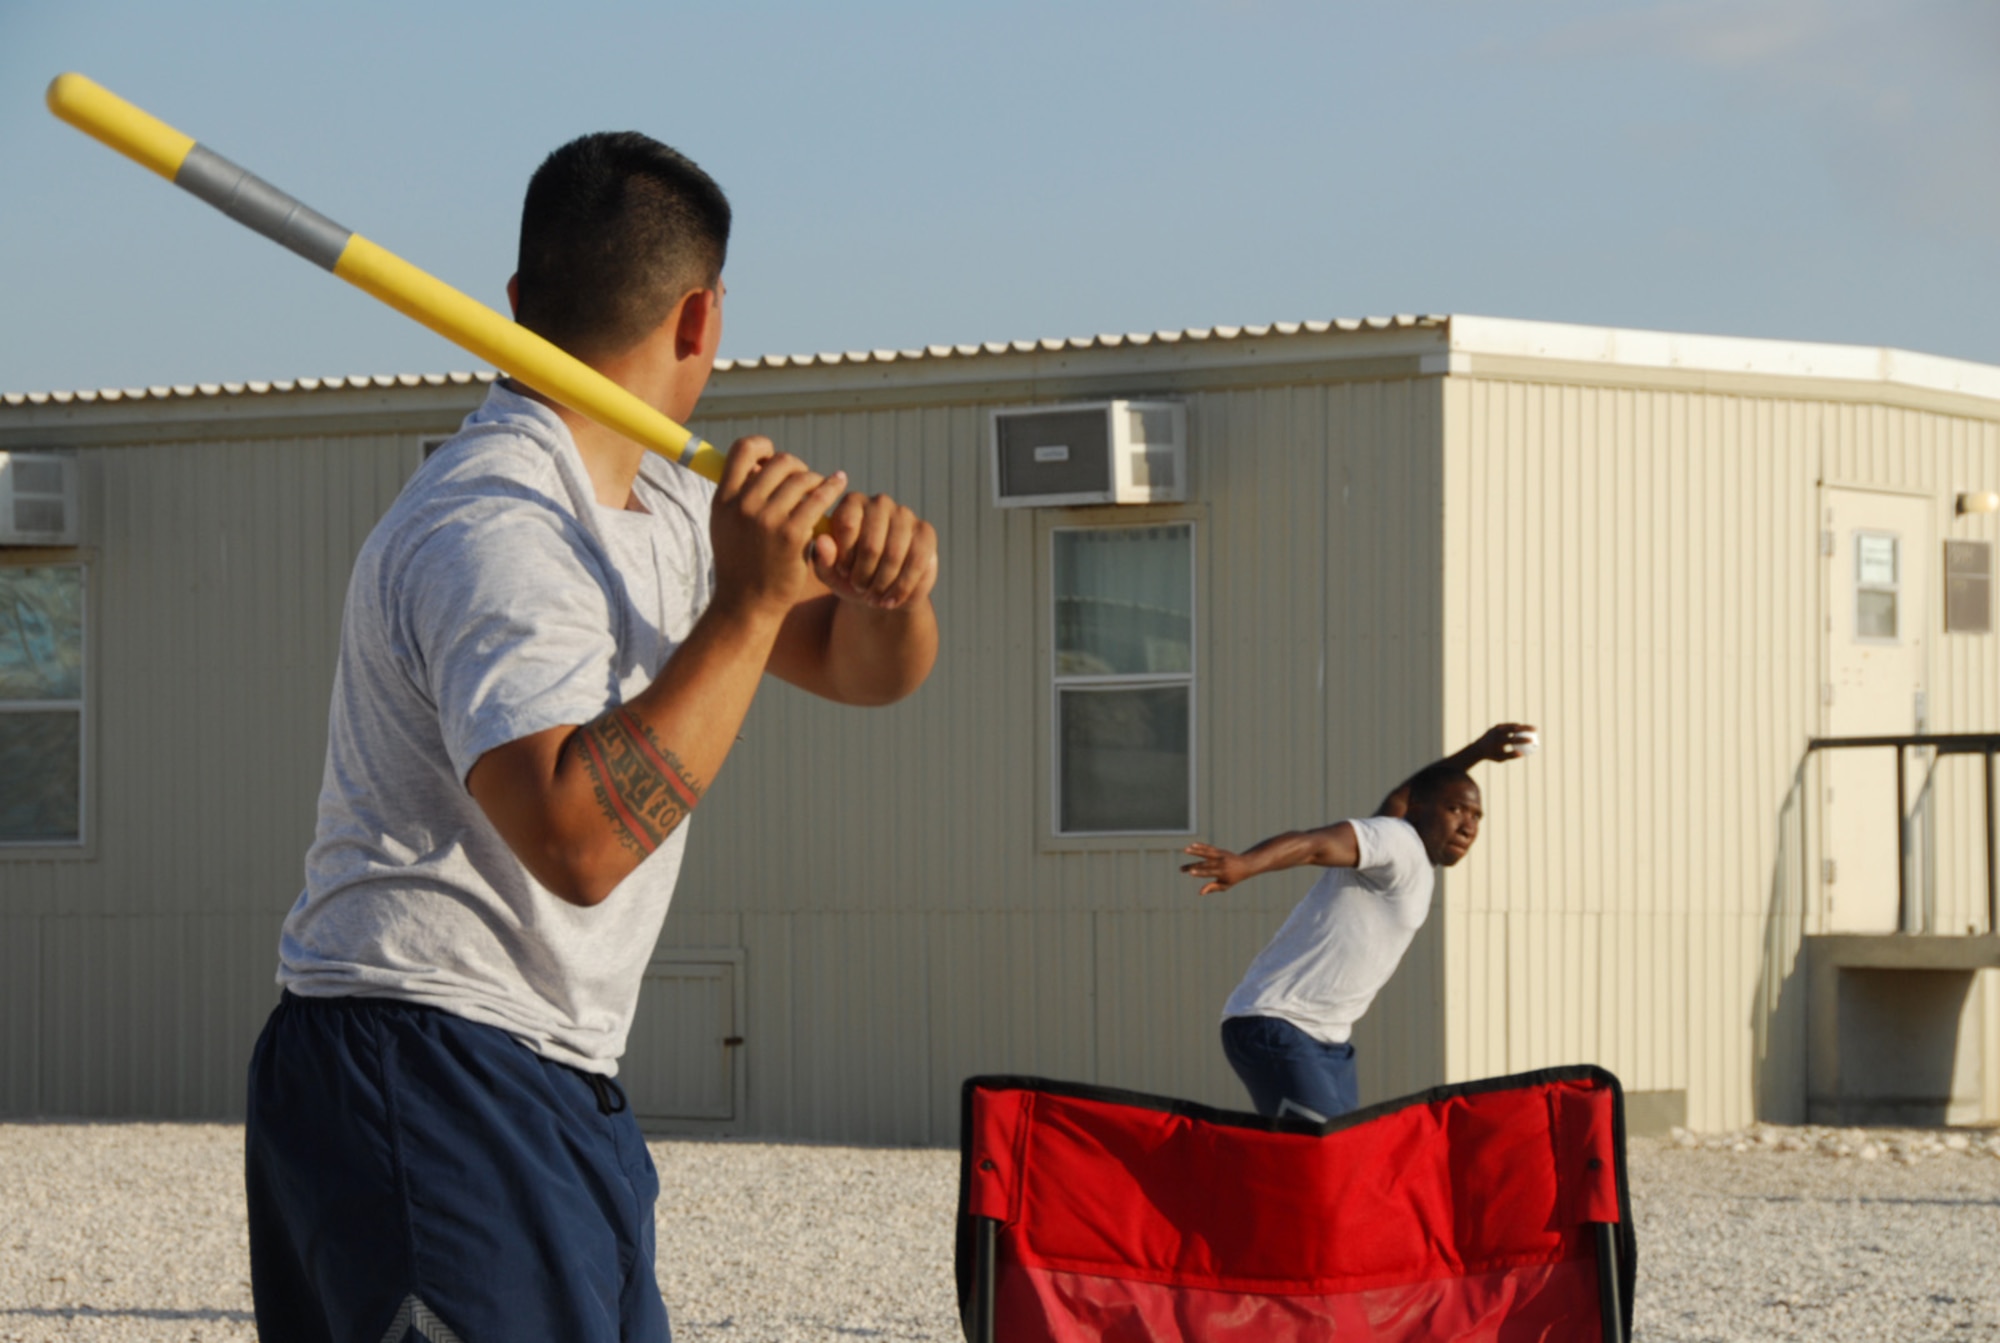 SOUTHWEST ASIA - Airmen from the 379th Expeditionary Aircraft Maintenance Squadron, B-1B Lancer, gather for a game of modified stickball between shifts at a Southwest Asia air base Dec. 13. Airman 1st Class Riyyad Schools winds up to deliver a pitch to Staff Sgt. Philip Kinsley. (U. S. Air Force photo/Staff Sgt. Douglas Olsen)